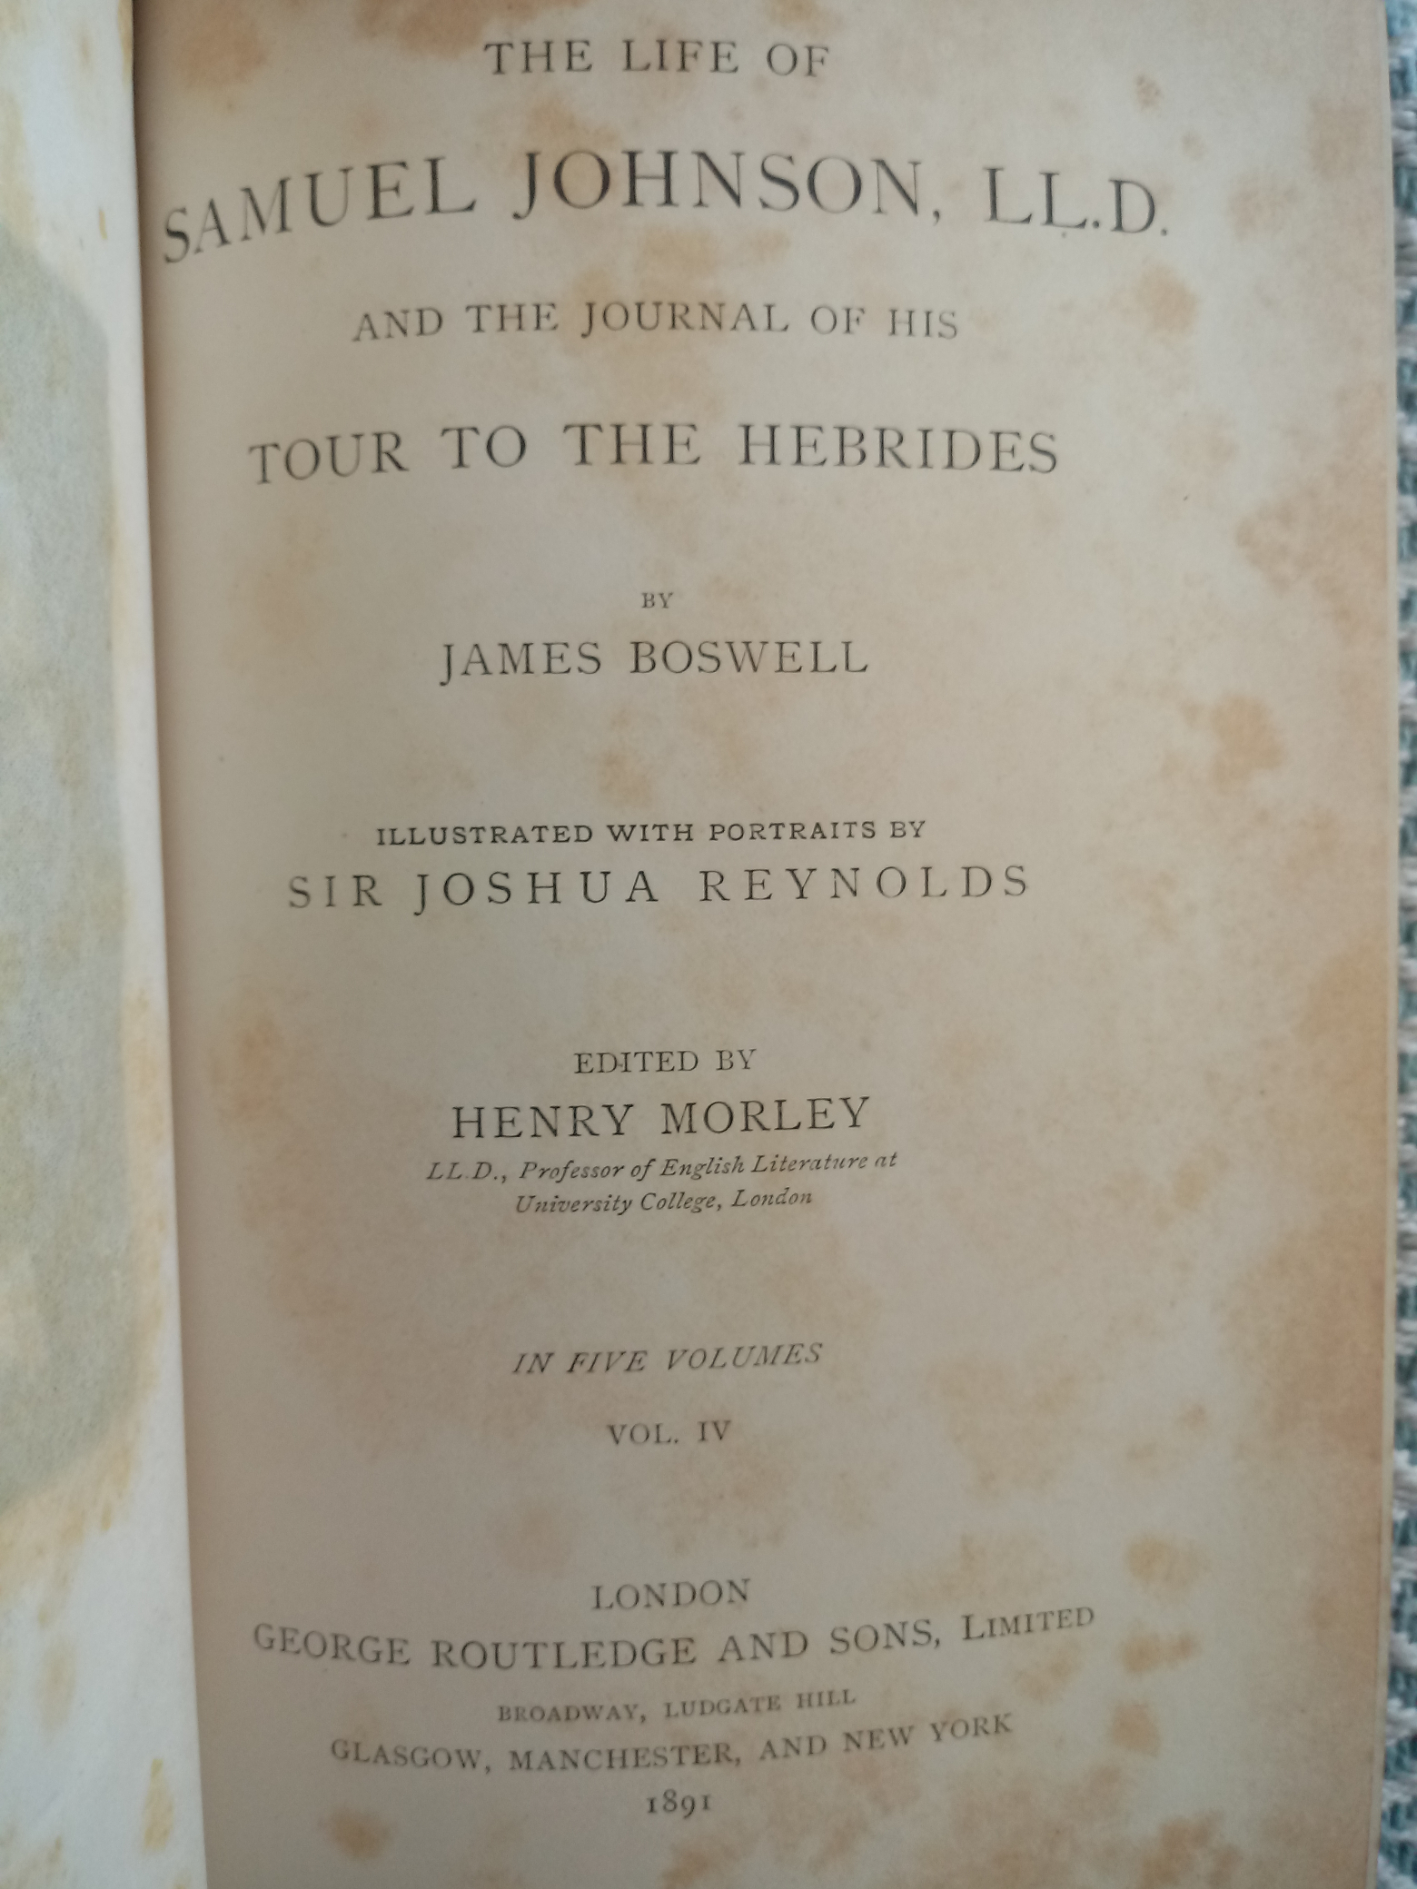 3 x Boswell's Life Of Dr Johnson by Henry Morley hardback books Published 1891 George Routledge - Image 10 of 10